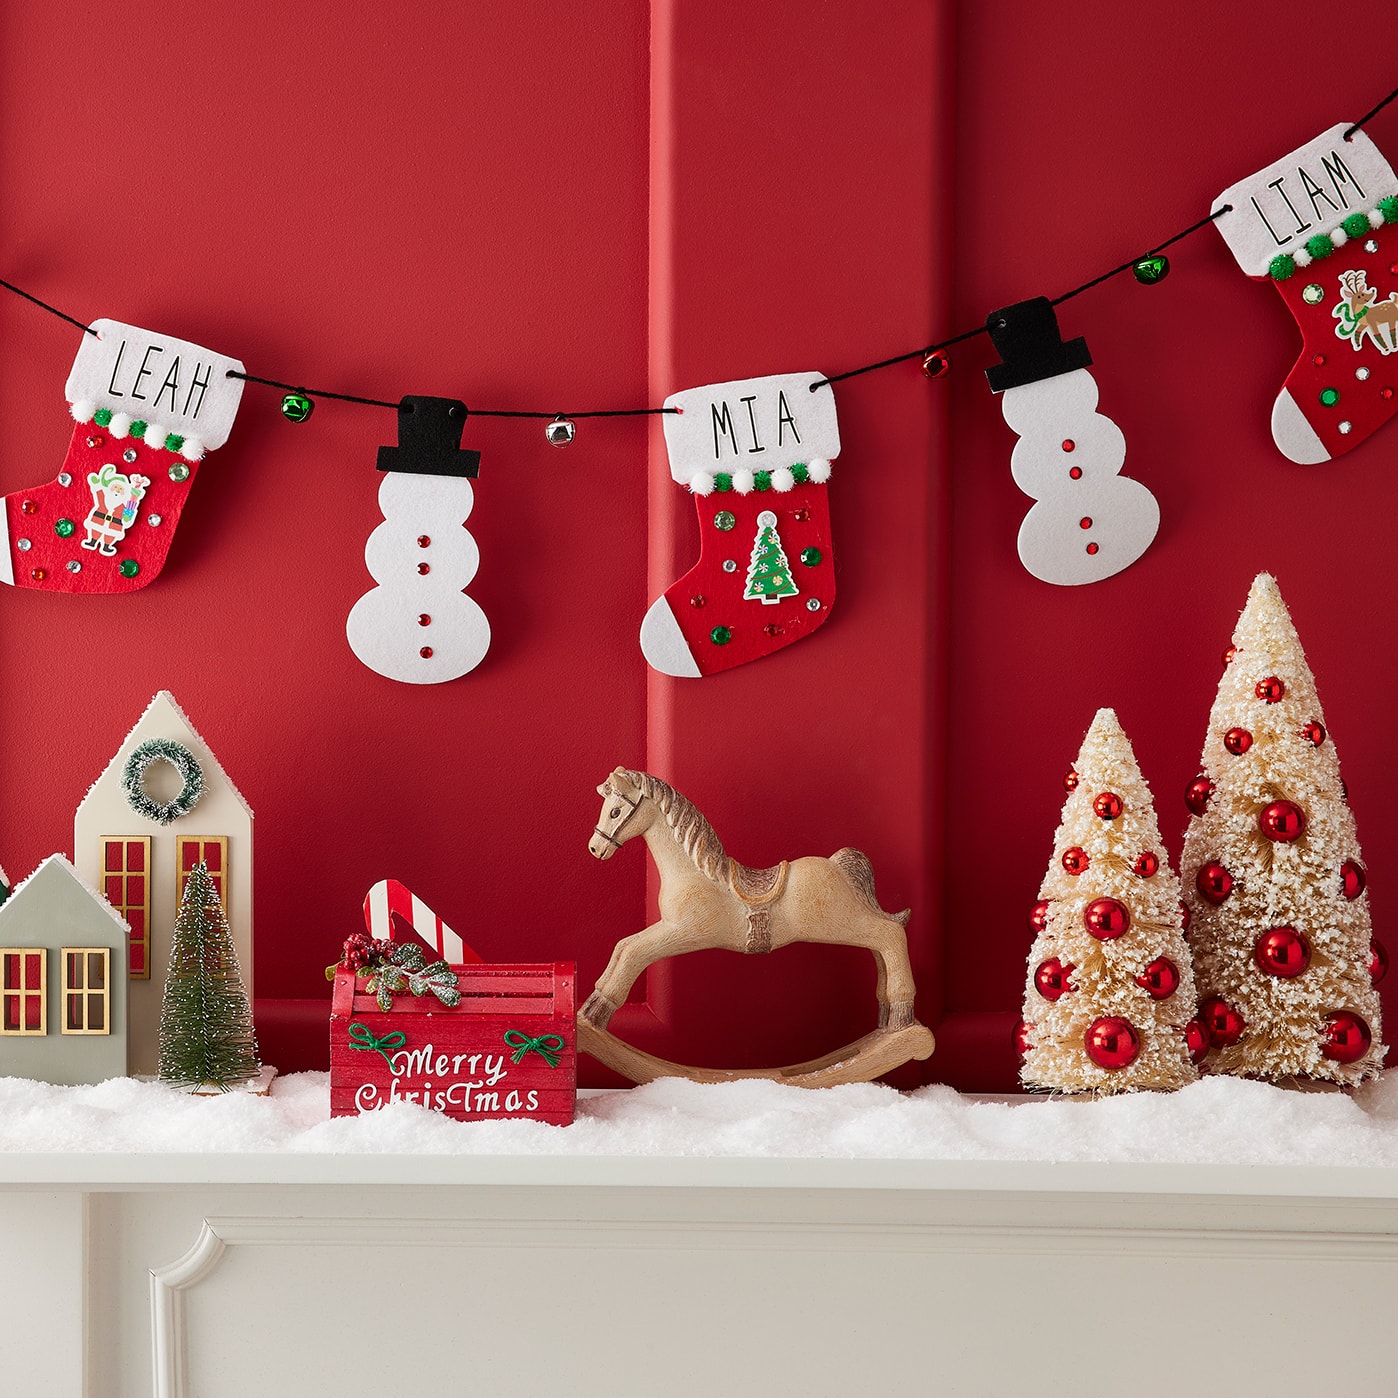 Christmas Craft Ideas & Art Projects | Michaels